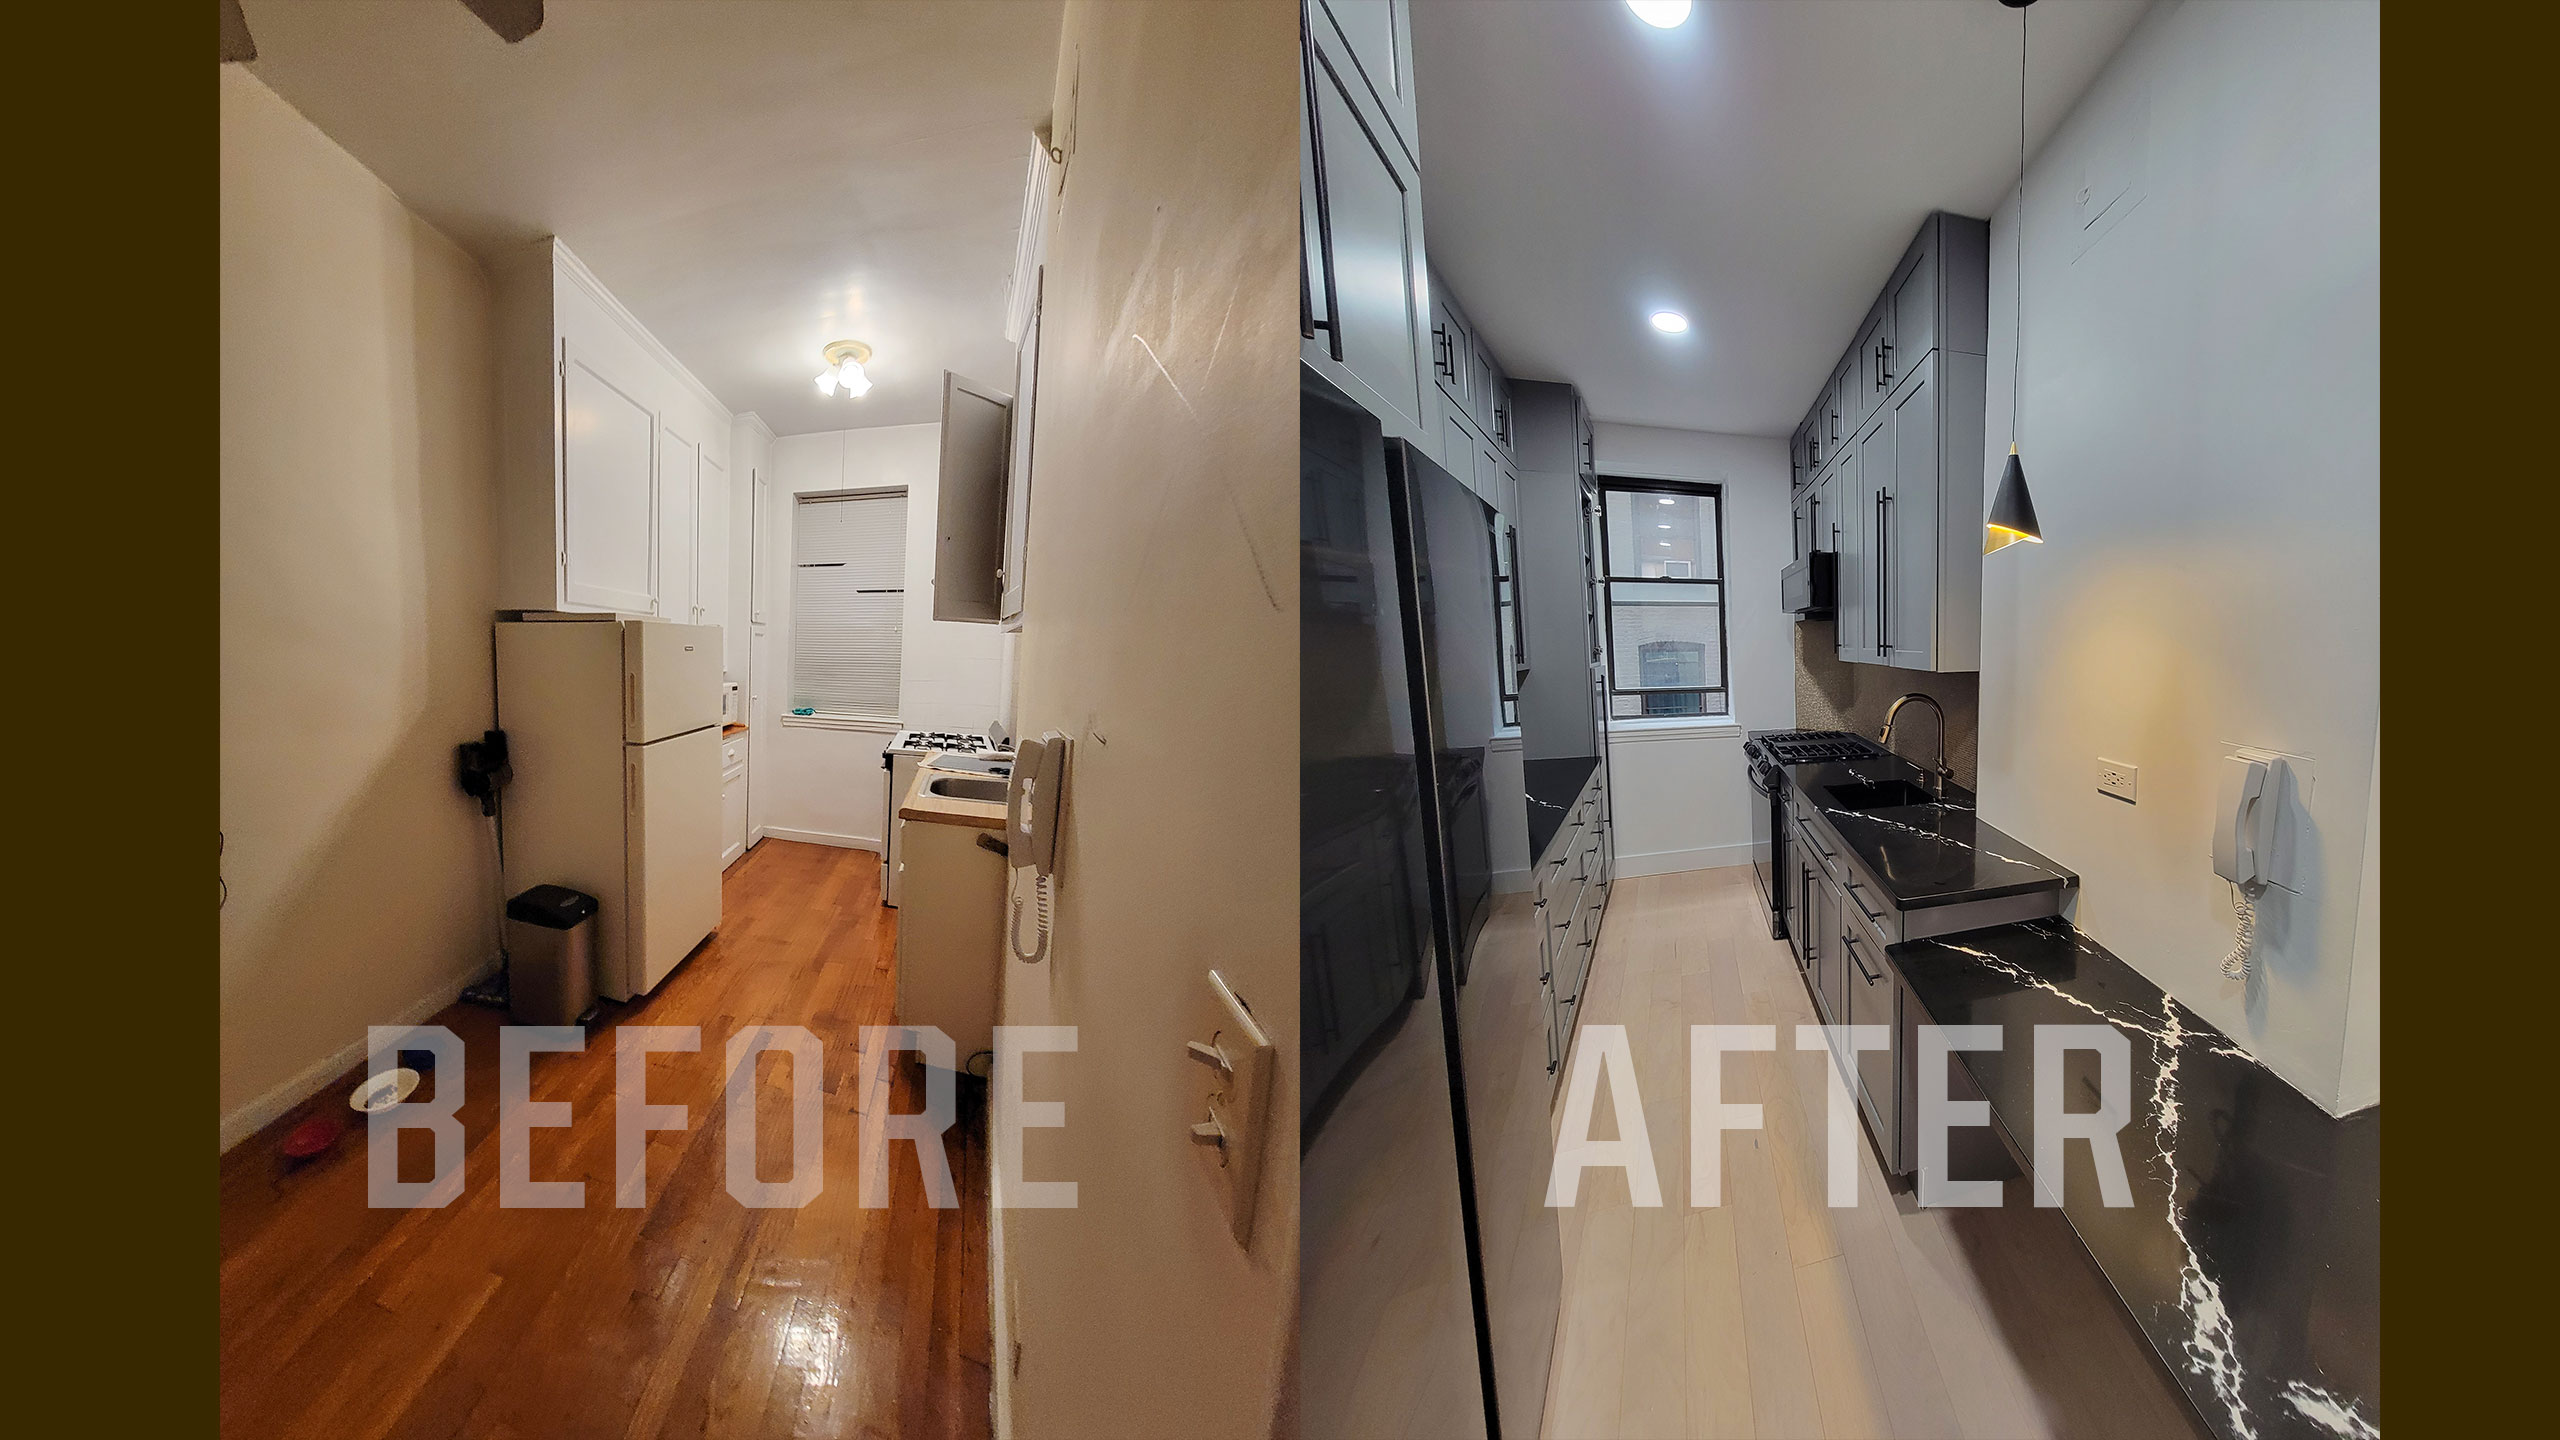 Before & After Home Remodel with FH Builders Interior Contractors NYC